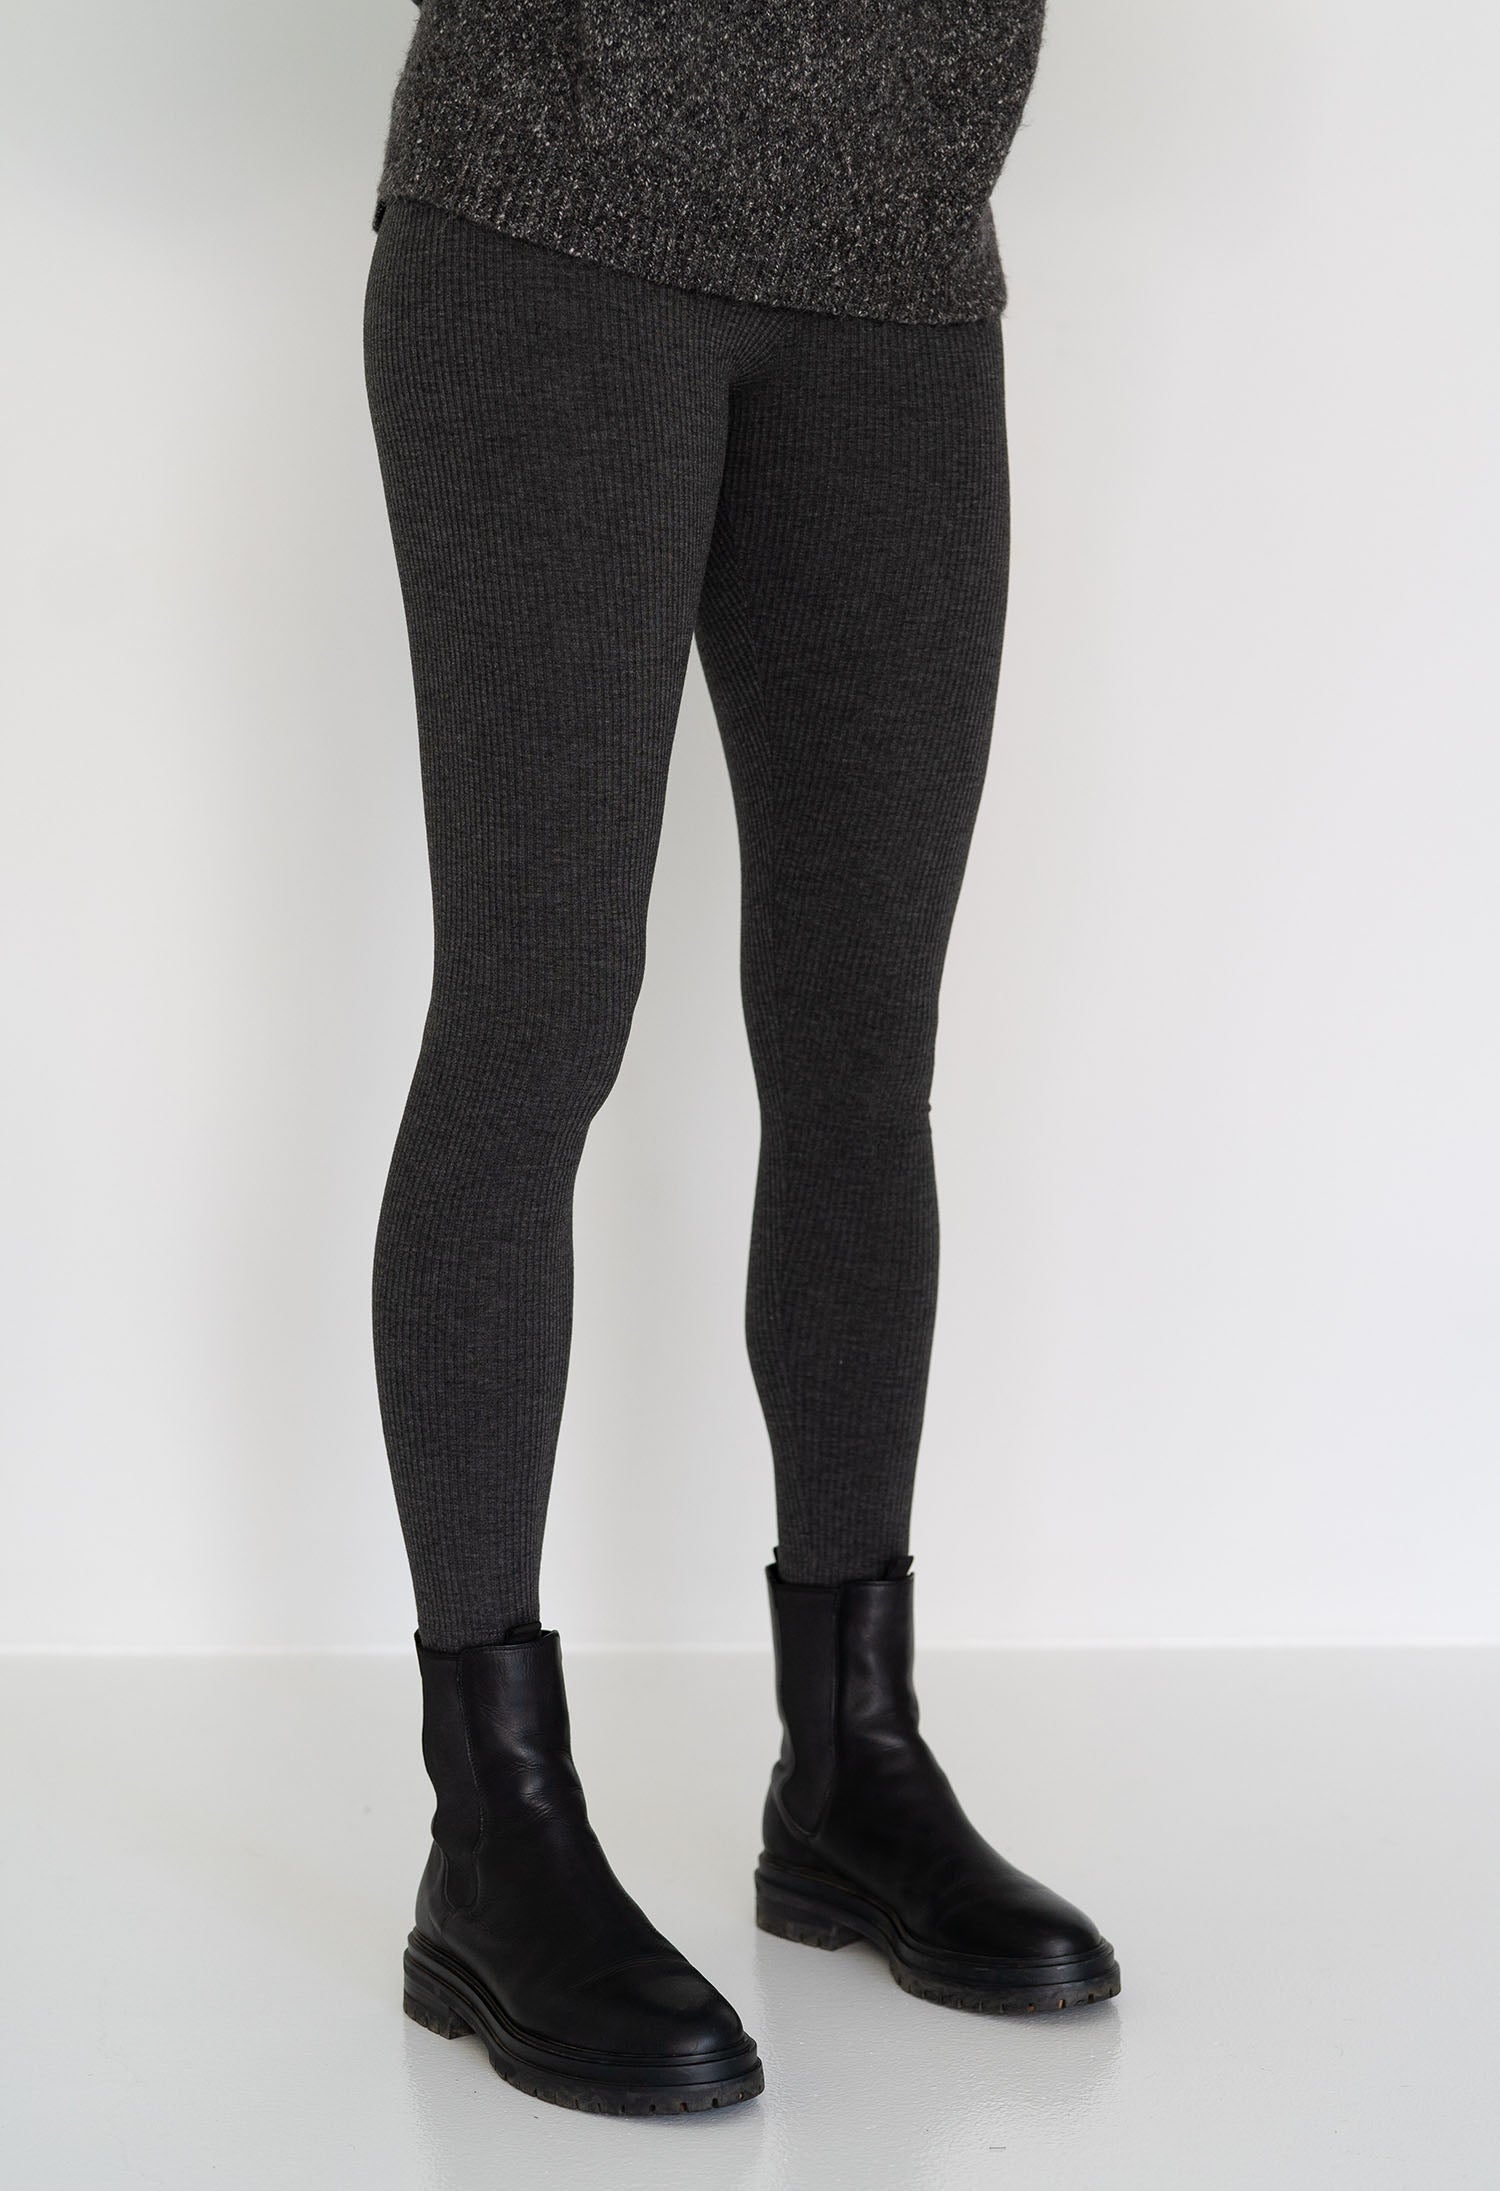 COTTON TIGHTS (TP) - CHARCOAL - Lucilla Schoolwear Ltd